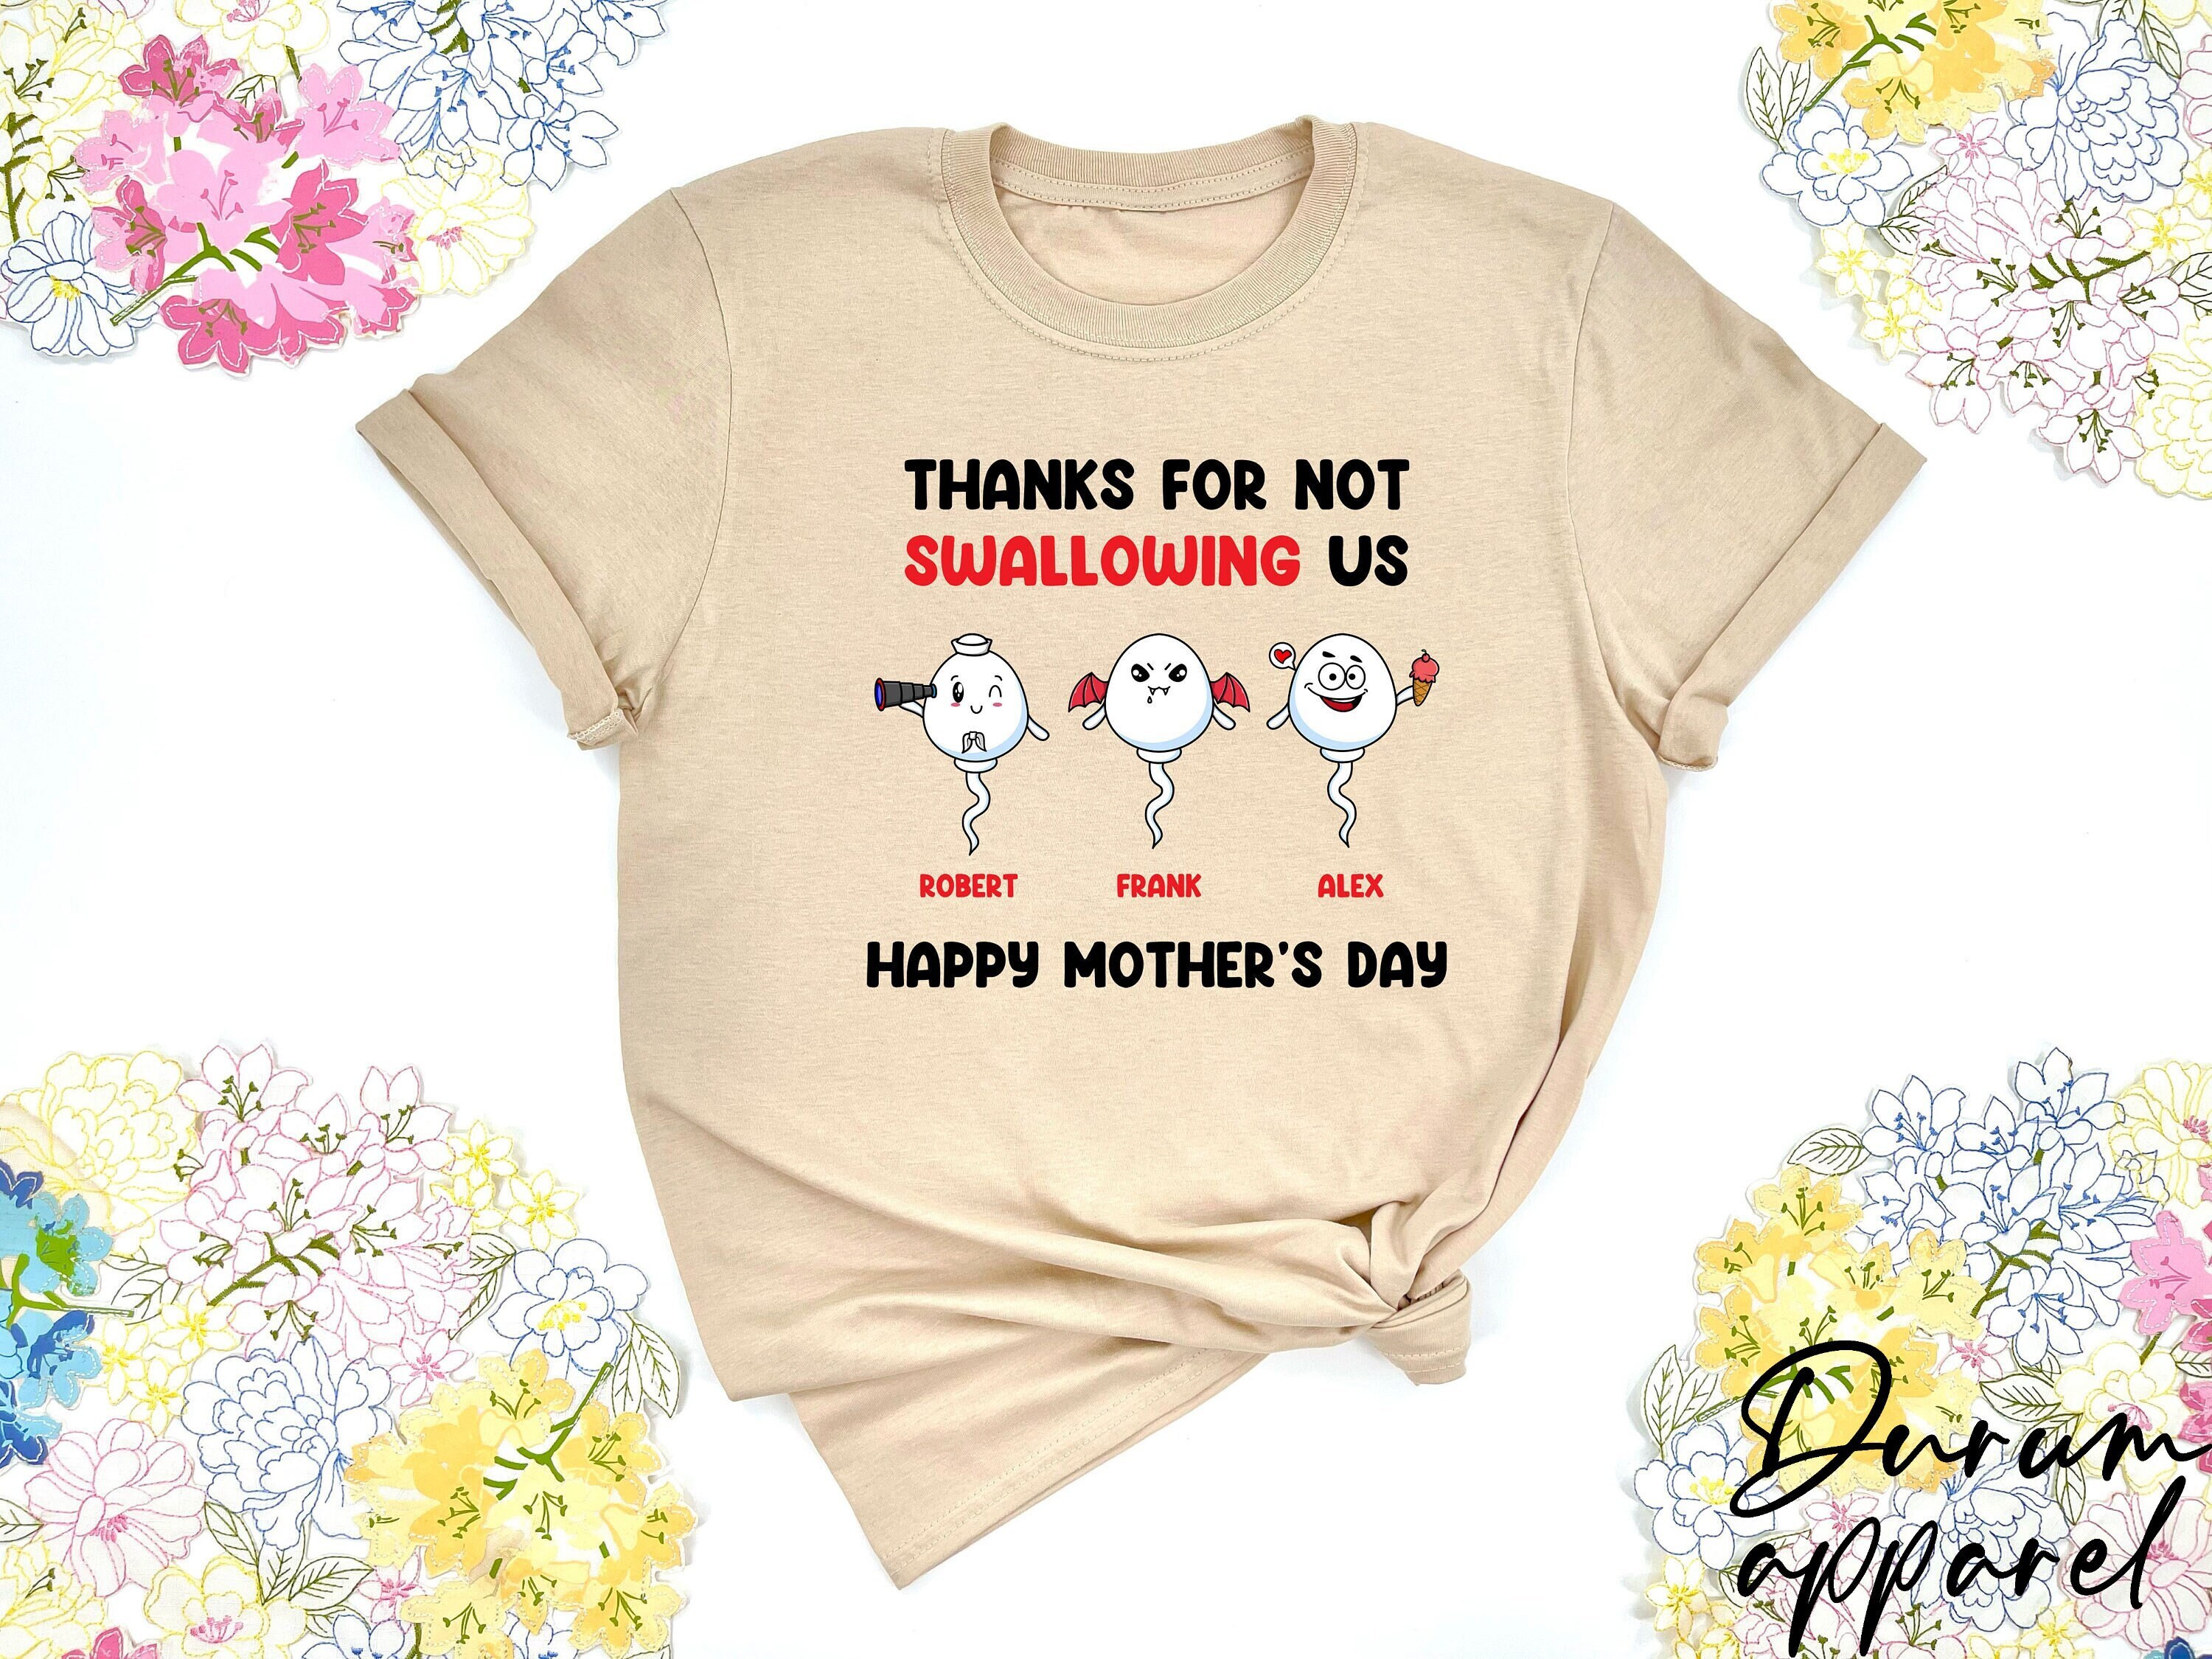 Thanks For Not Swallowing Us Shirt, Personalized Mom Shirt With Kids Names, Funny Mother’s Day Gift From Children, Custom Name Mama T-shirt